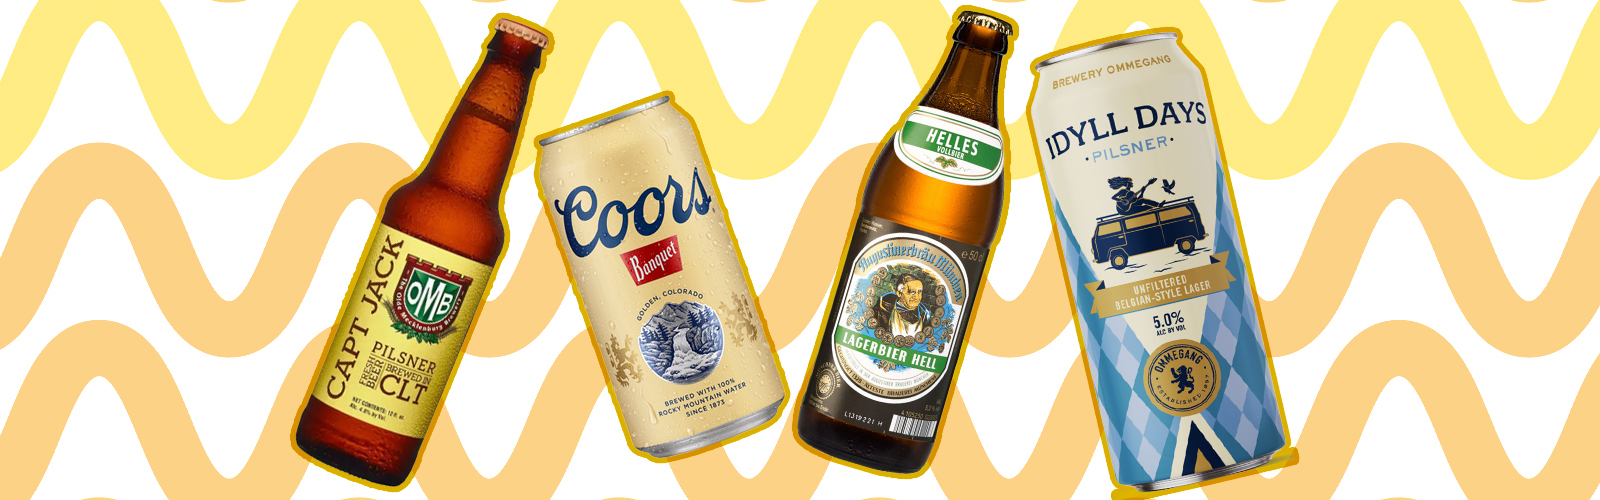 OMB/Coors/Augustiner/Ommegang/istock/Uproxx